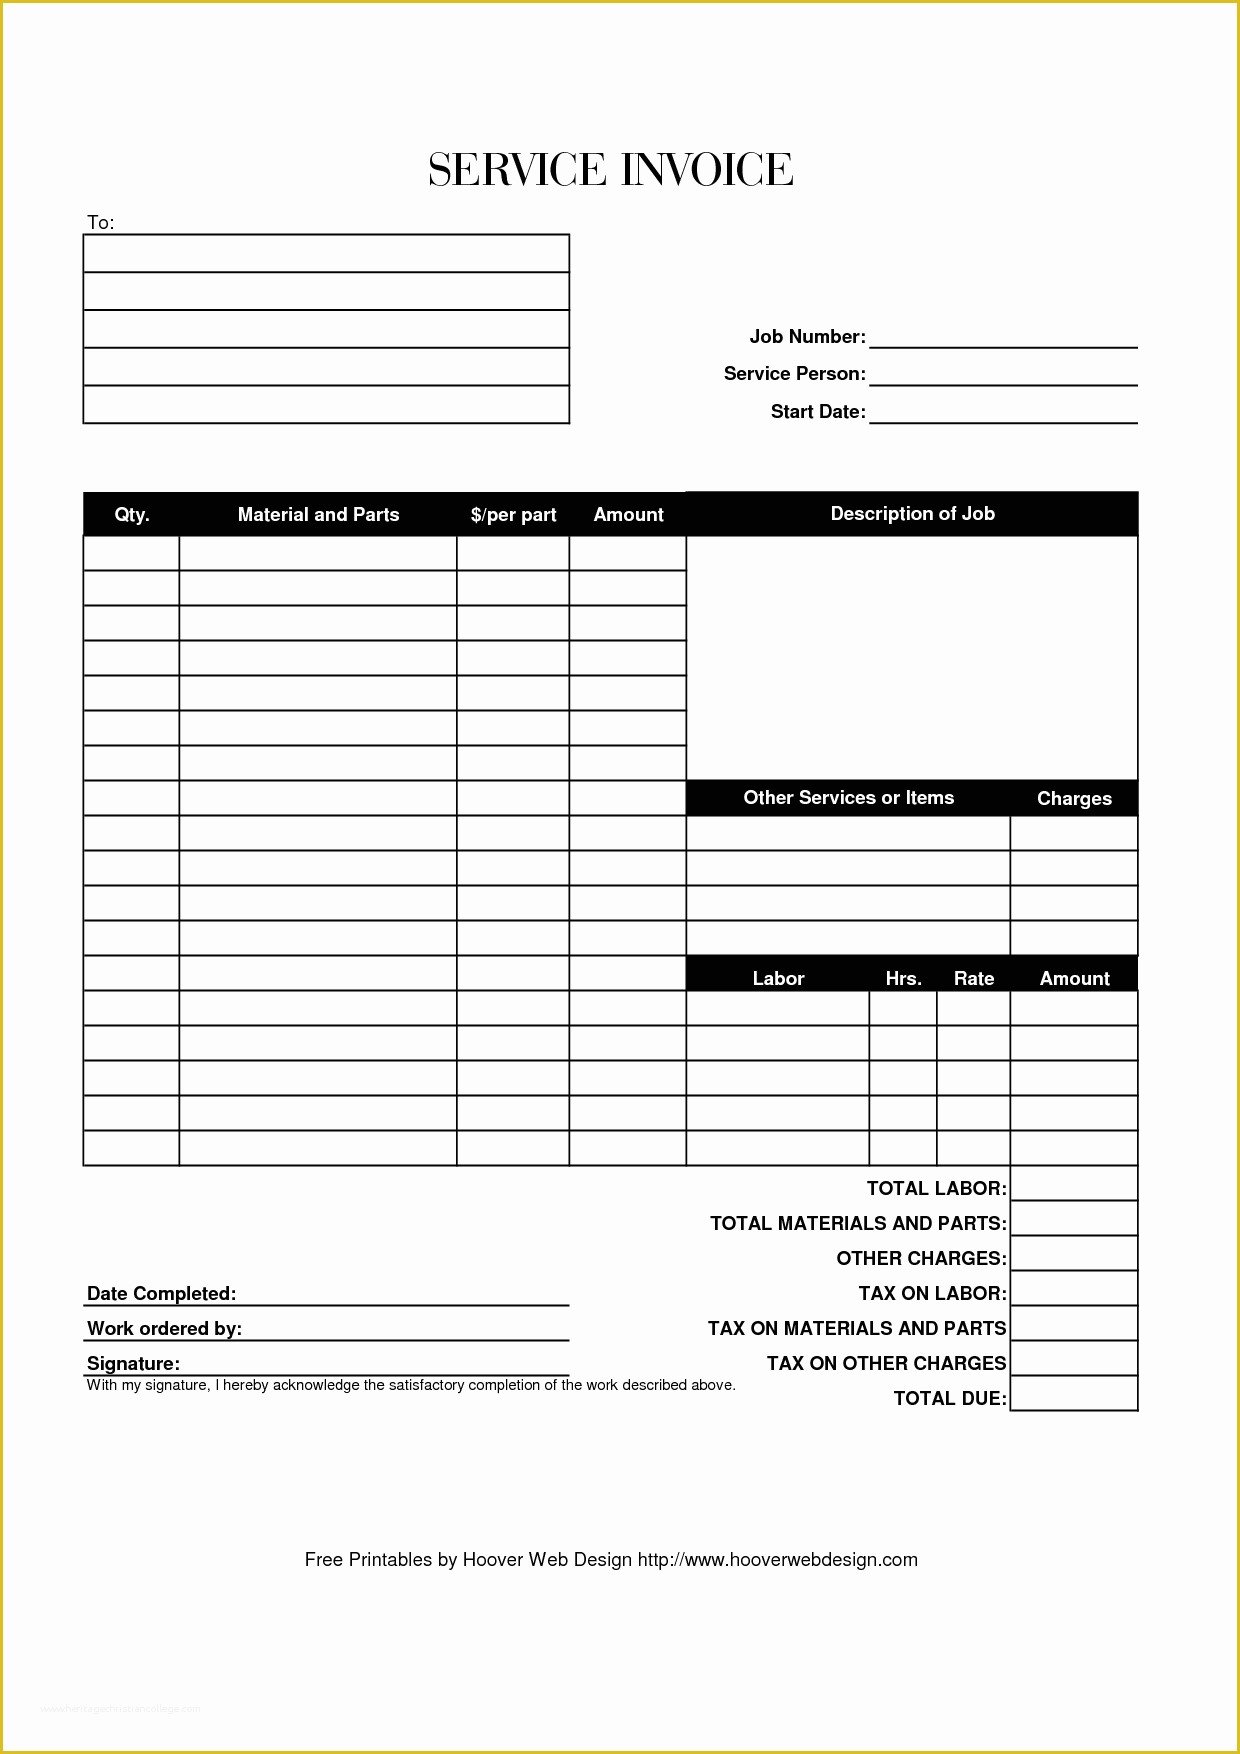 Free Construction Invoice Template Pdf Of Hoover Receipts